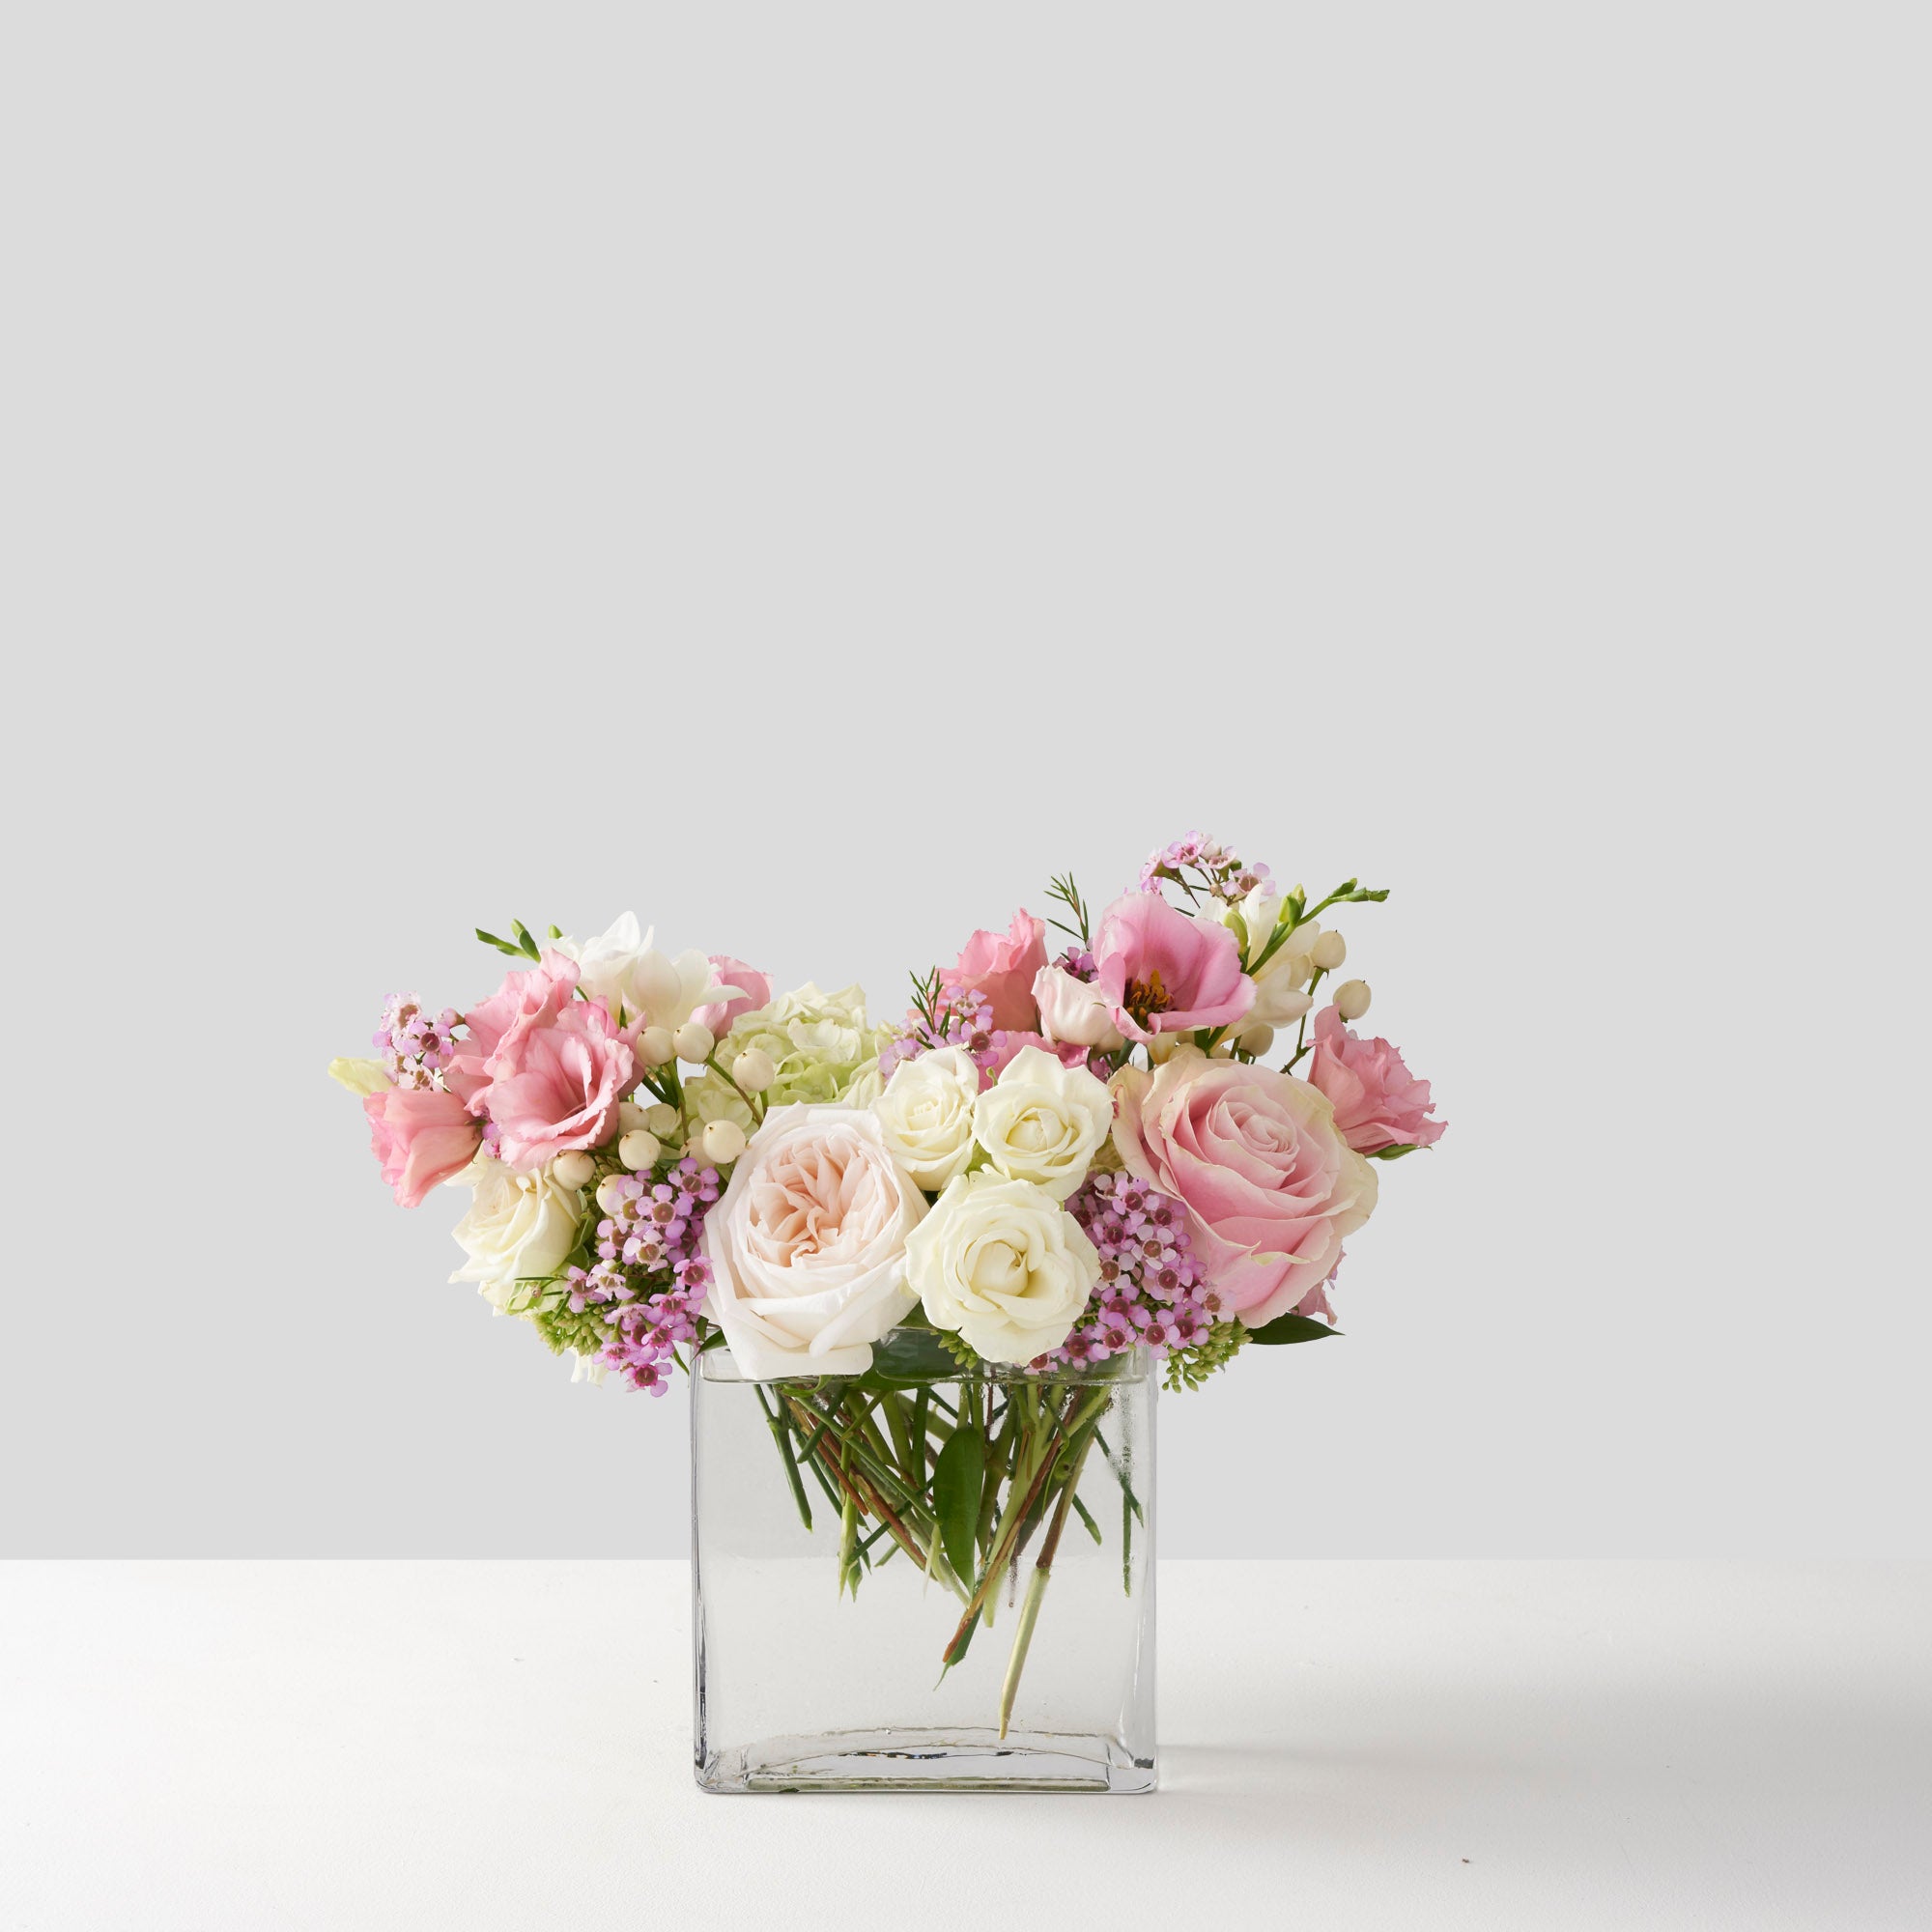 Pale pink and cream roses, white hydrangea, pink wax, and pink lisianthus flowers, arranged in a rectangular glass vase on white background.